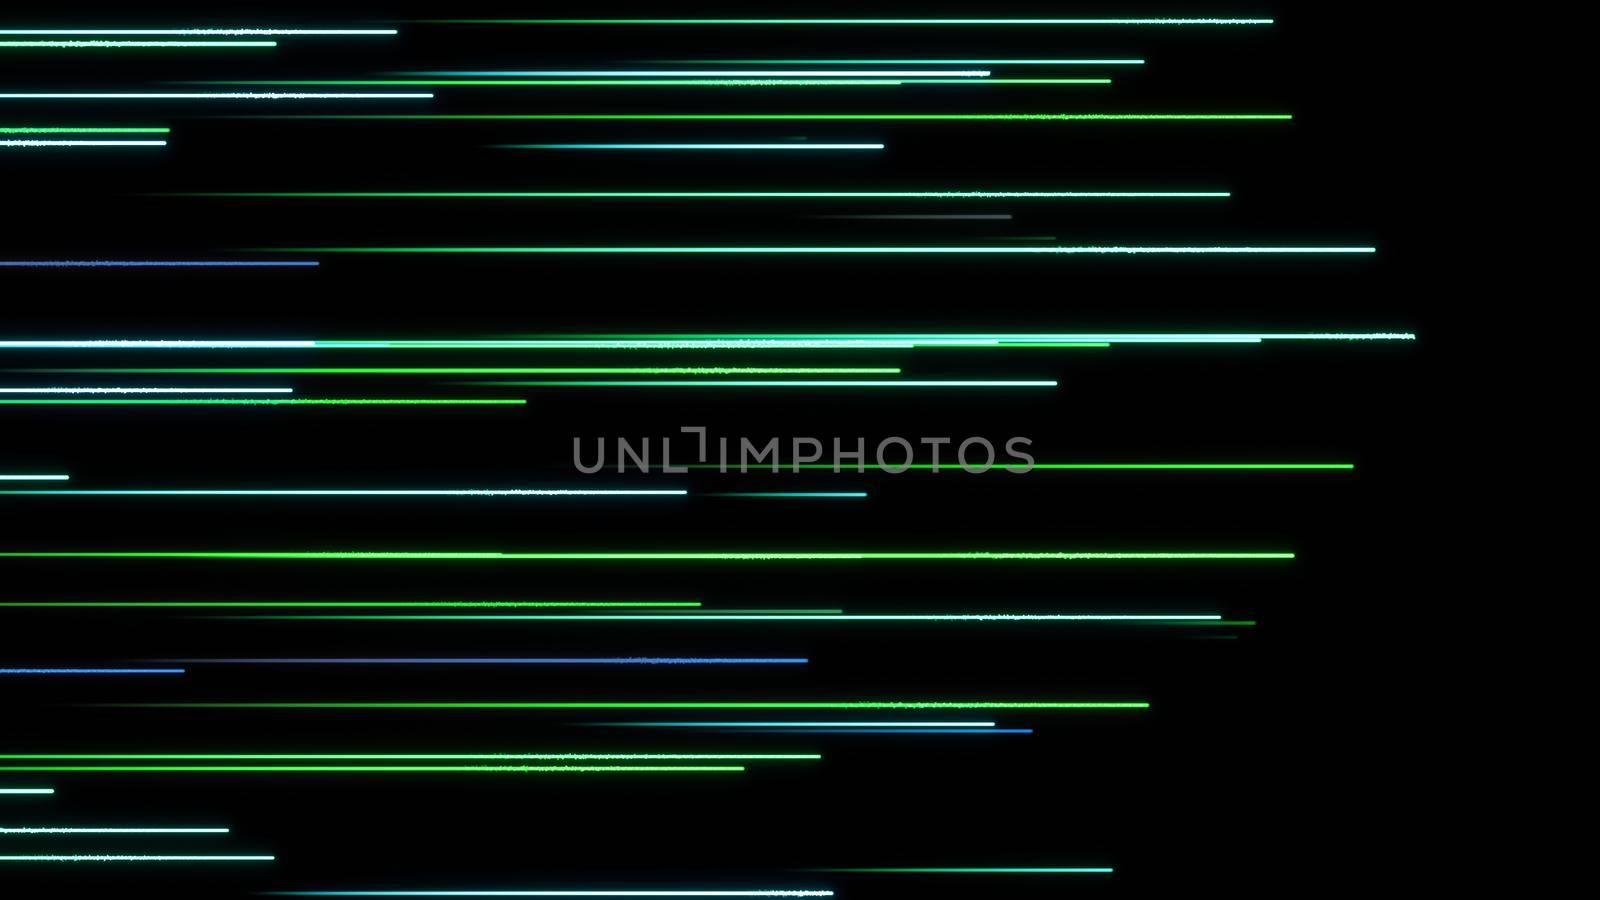 Glowing backgrounds of lines, abstract 3d illustration